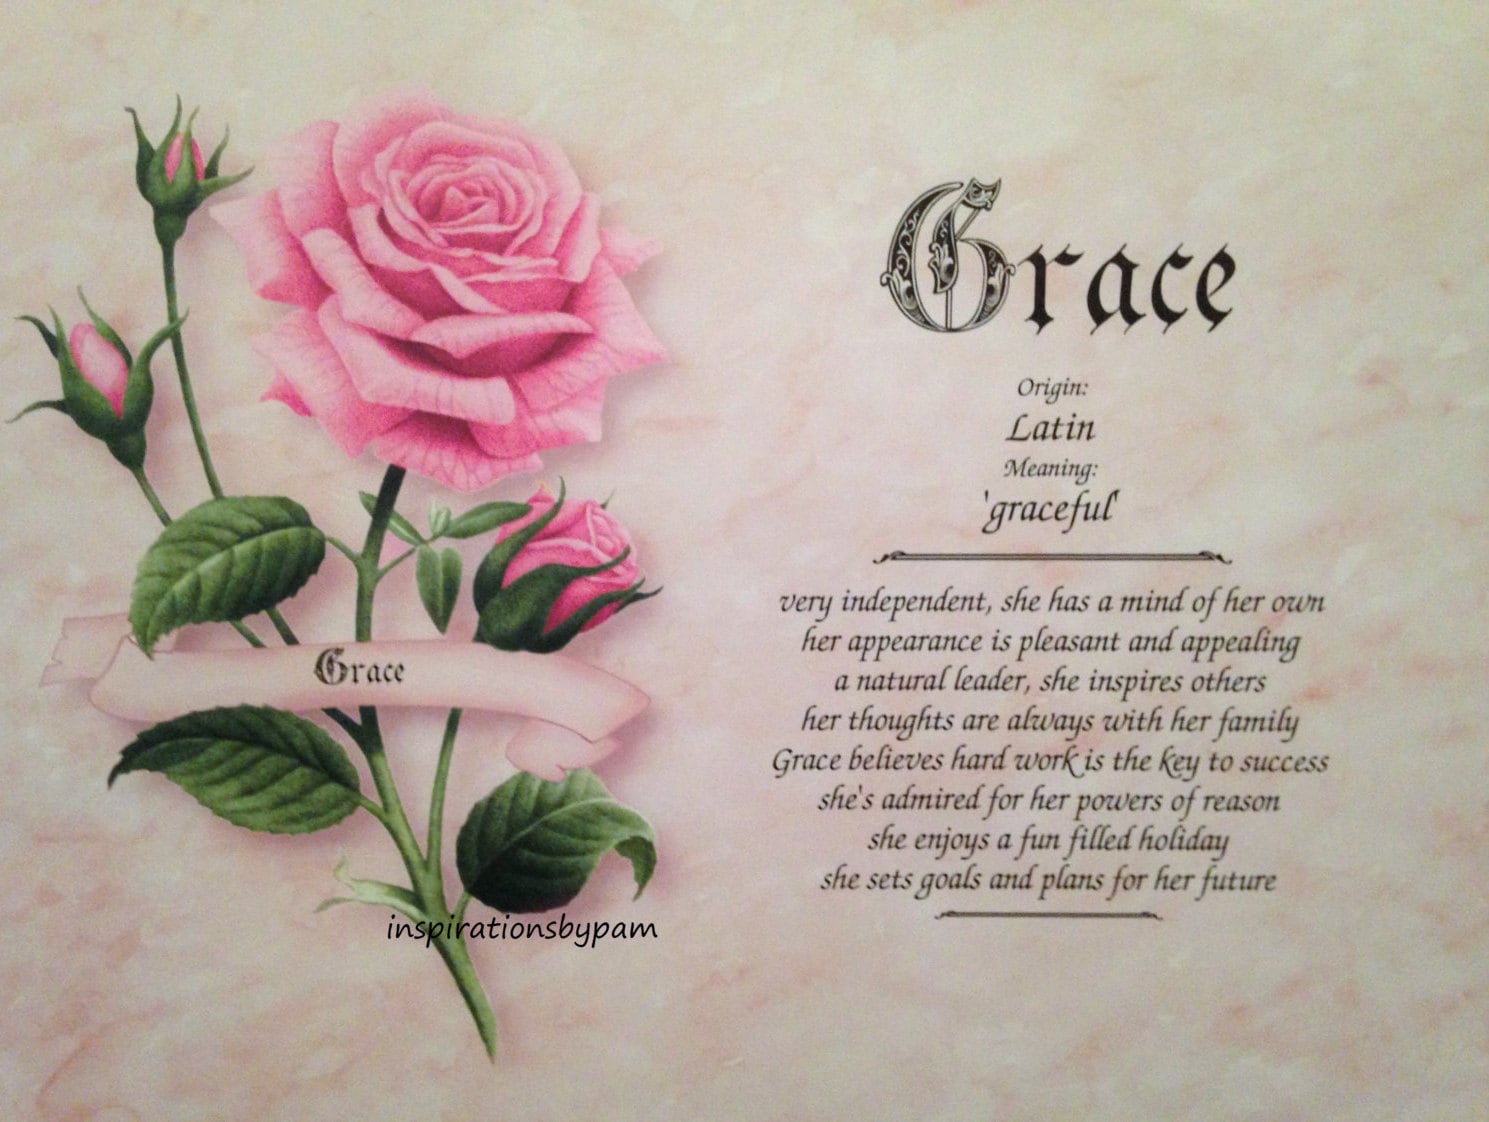 what is the full meaning of grace